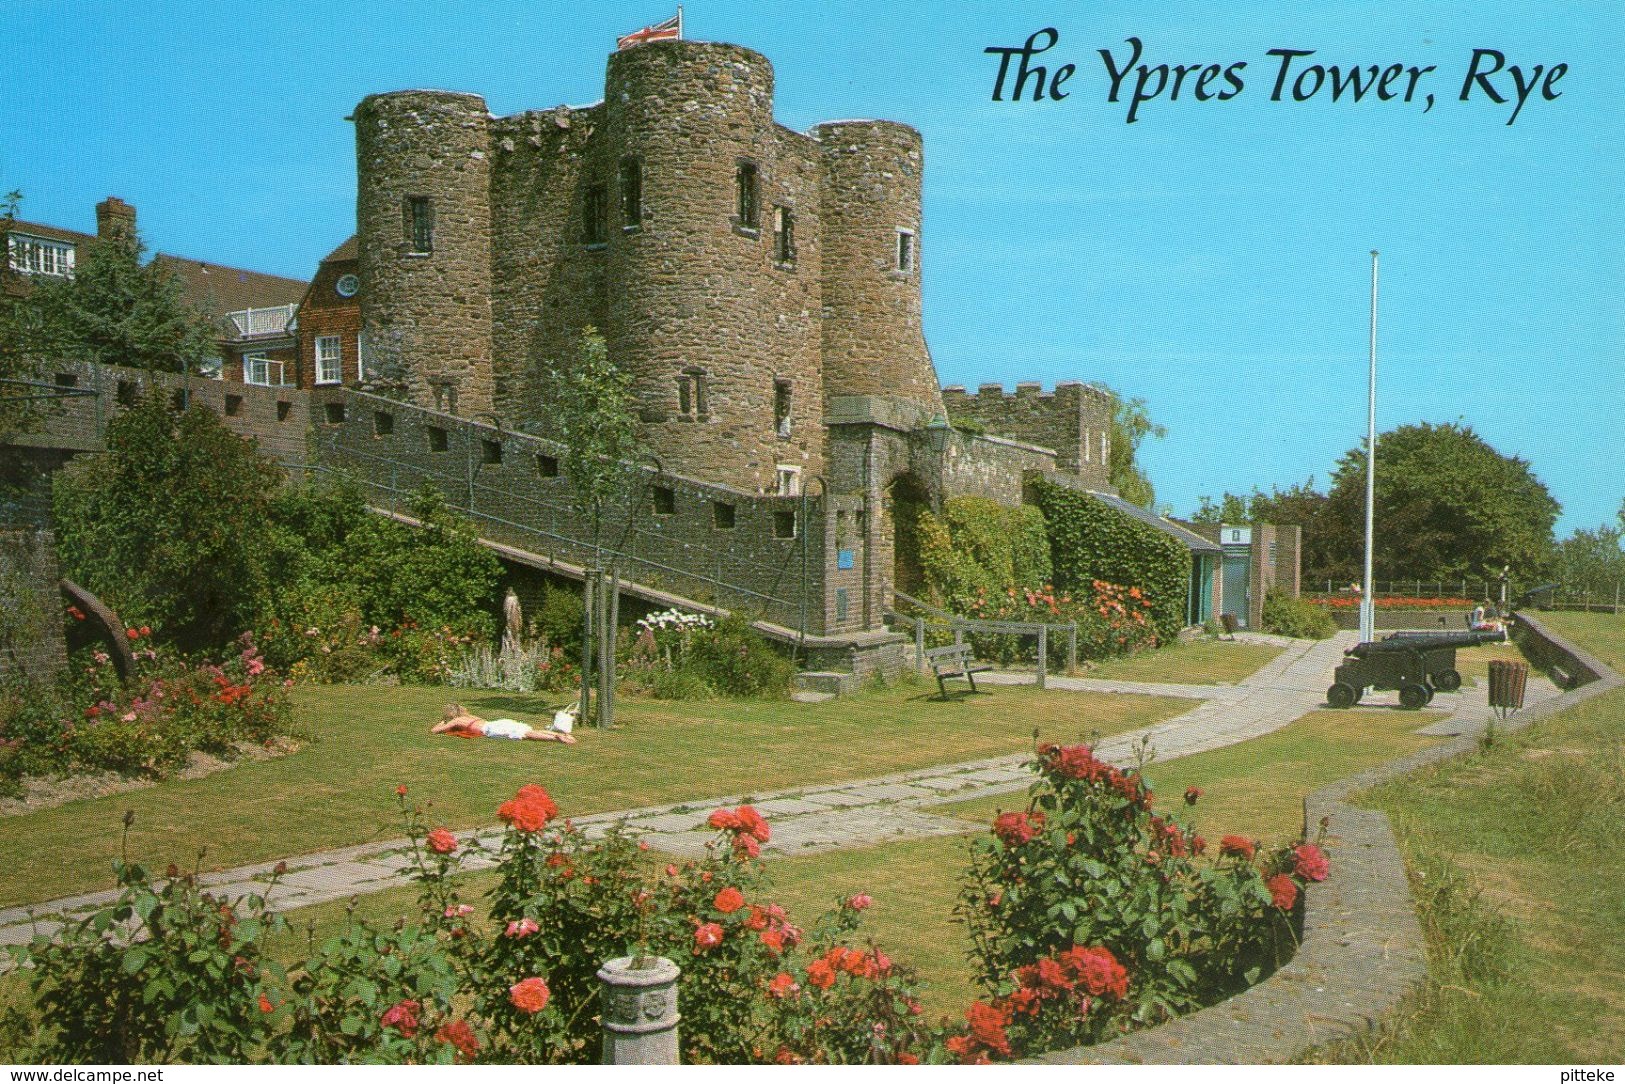 The Ypres Tower - Rye